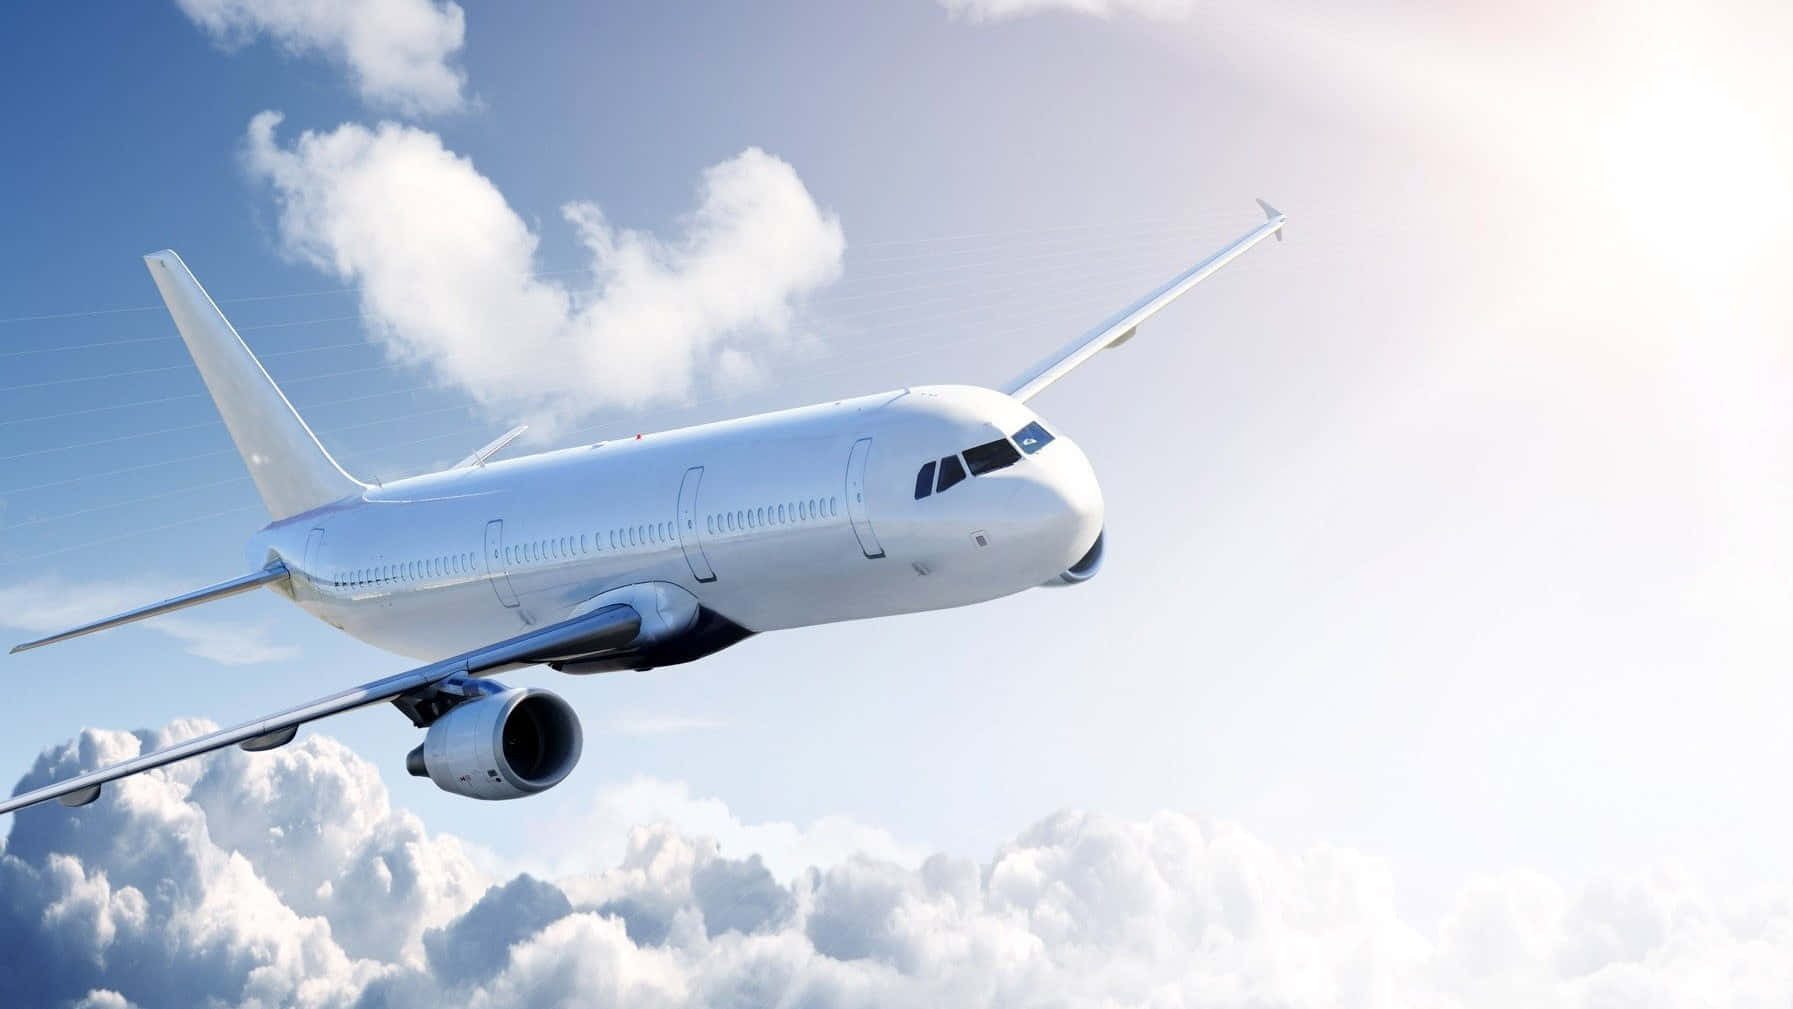 Fly high with a commercial airline